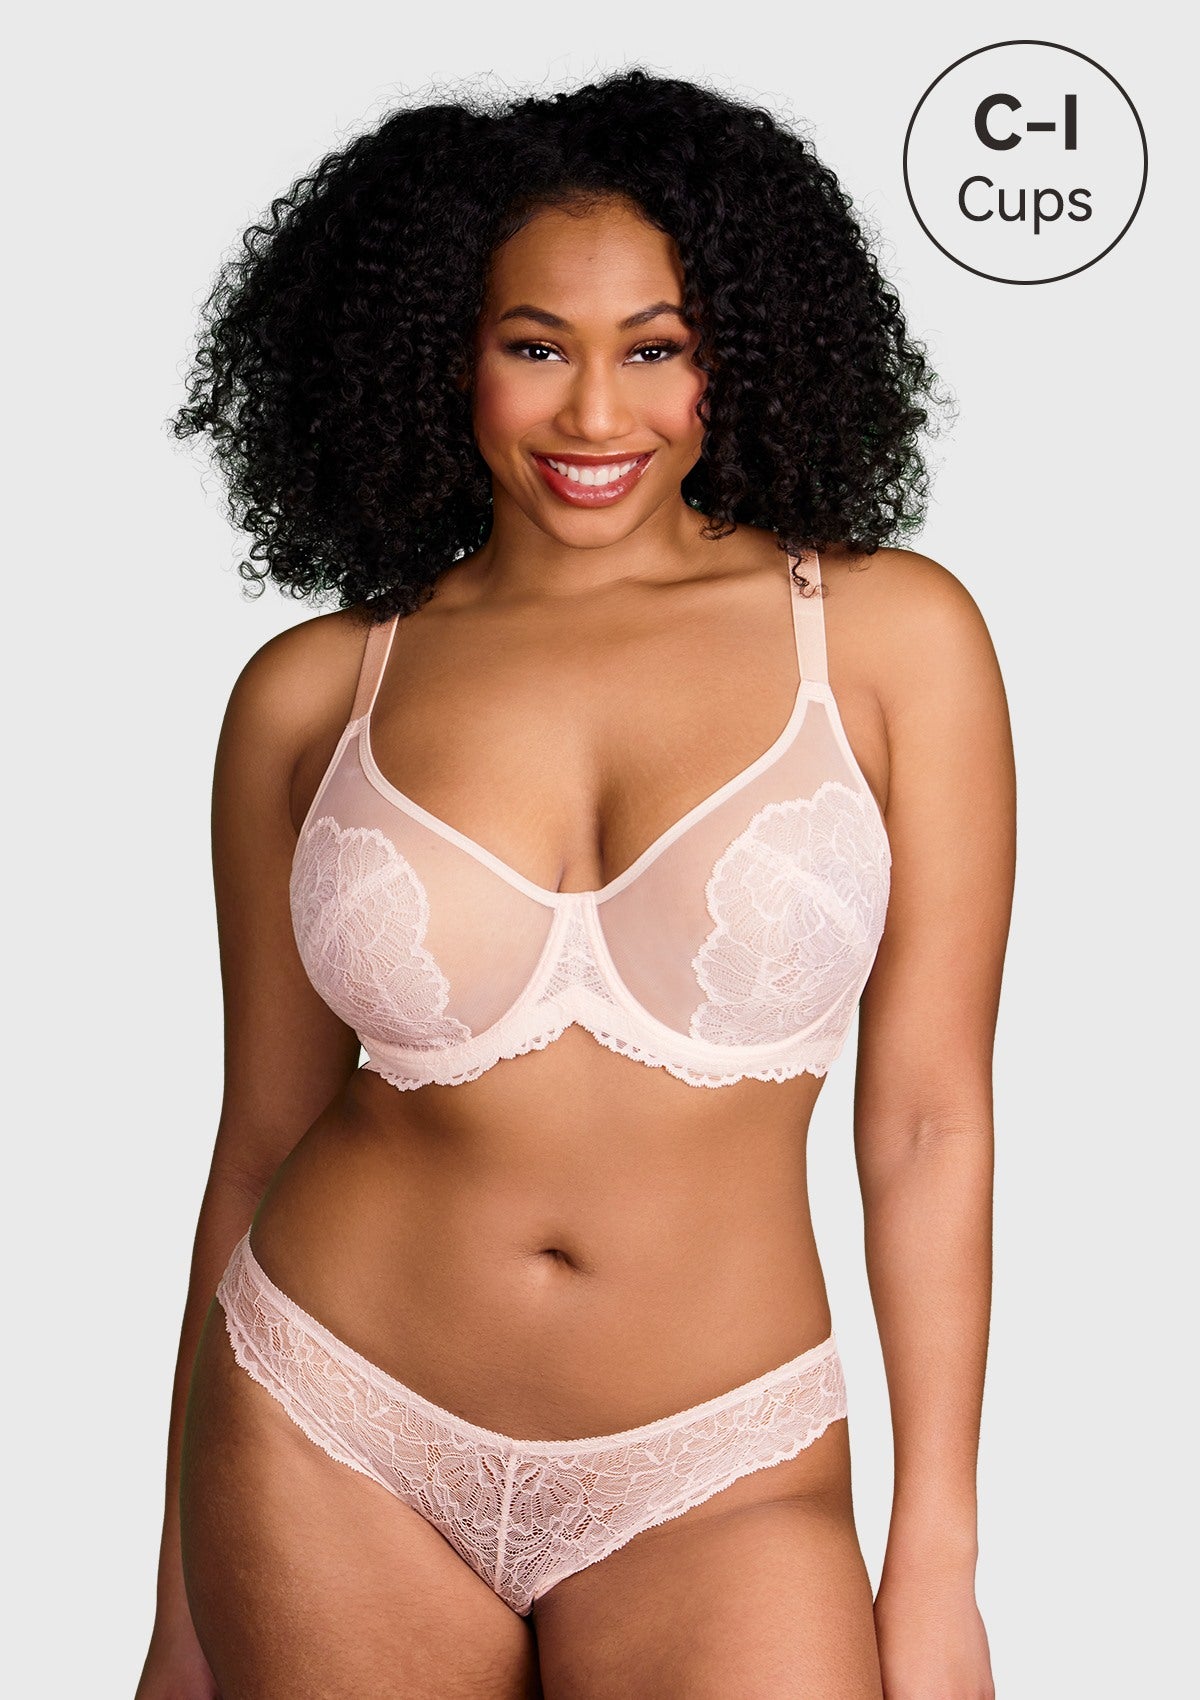 HSIA Blossom Sheer Lace Bra: Comfortable Underwire Bra For Big Busts - White / 42 / D